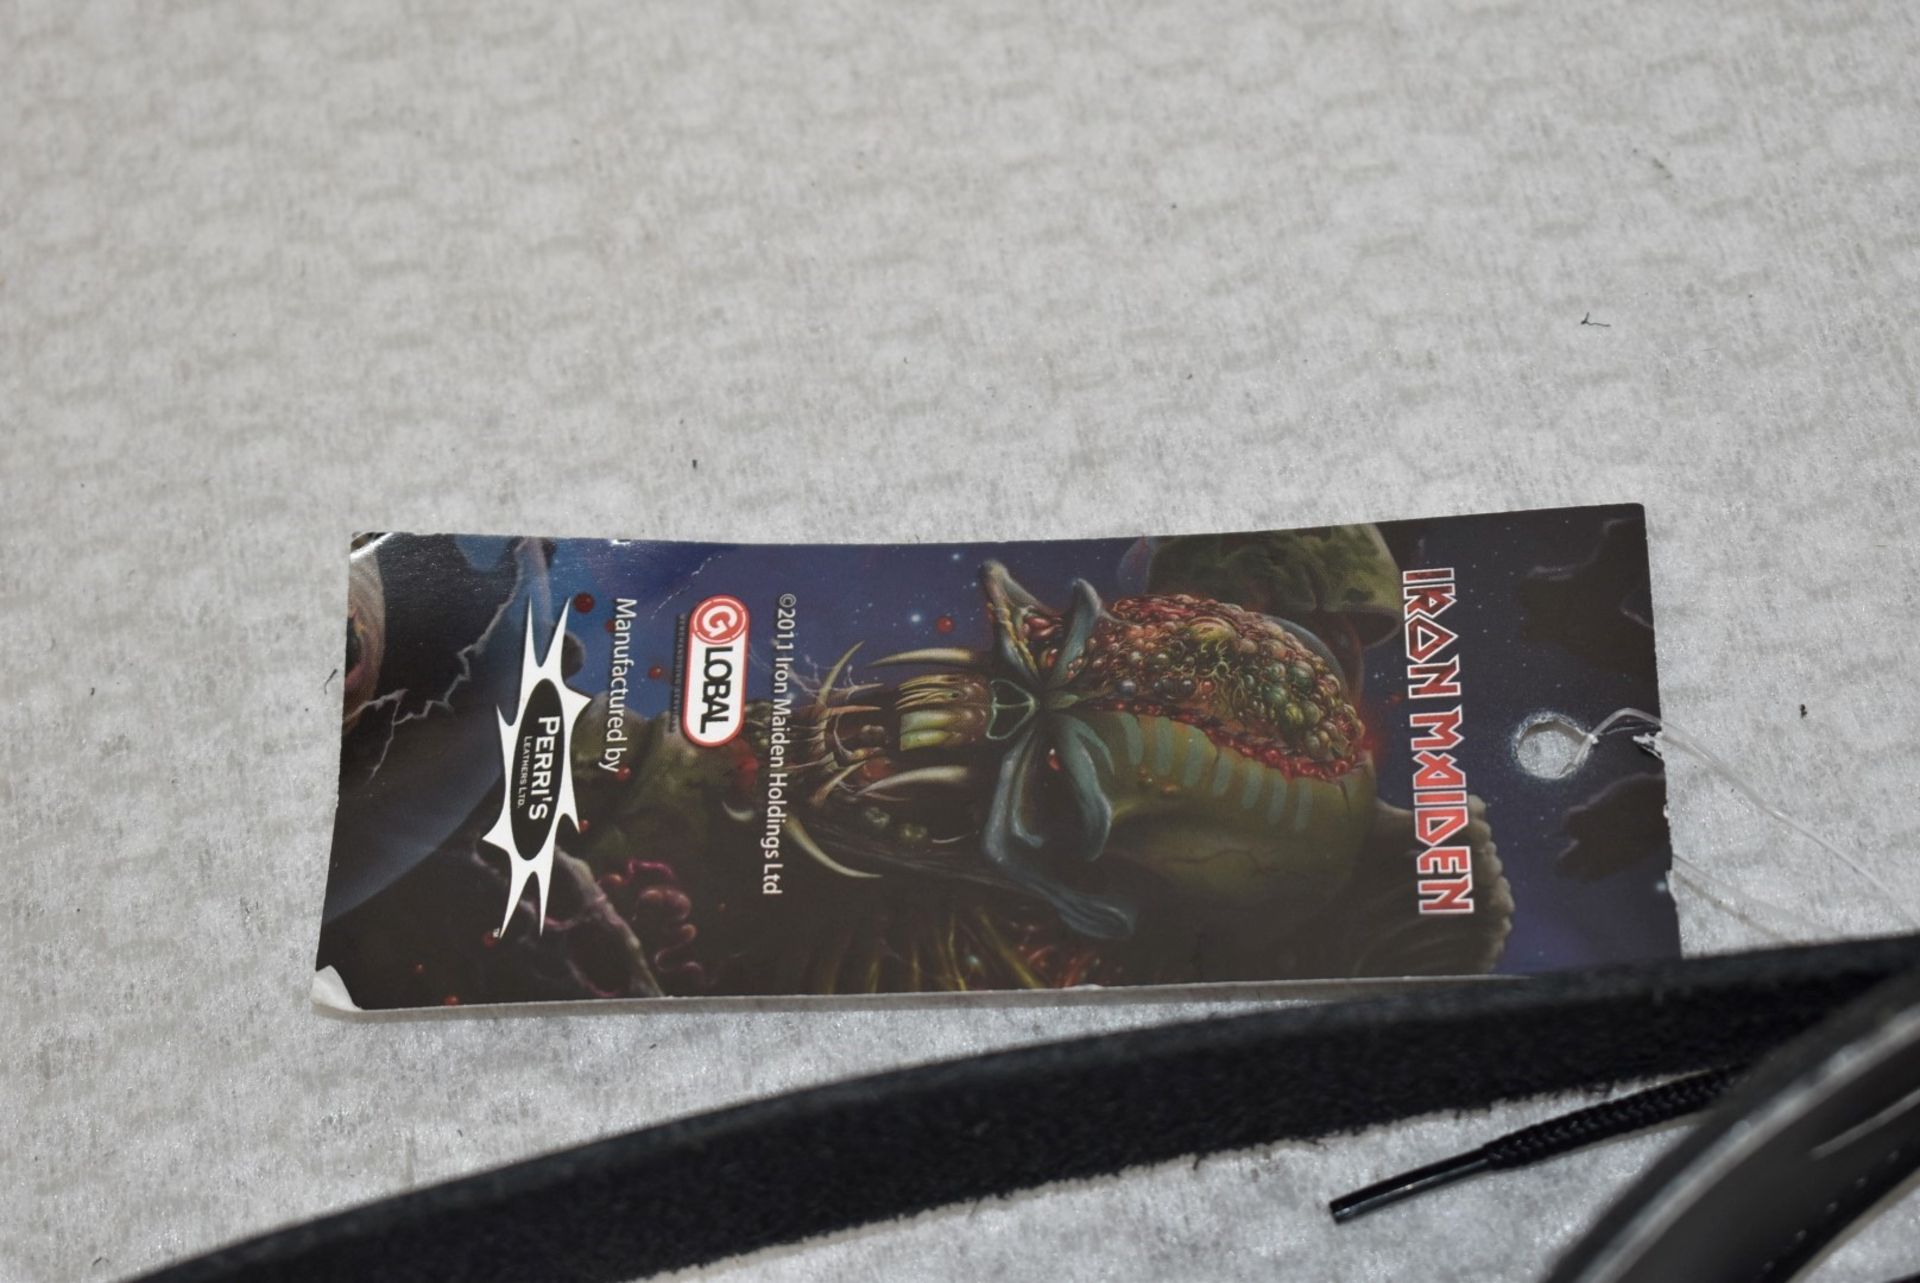 1 x Iron Maiden Leather Guitar Strap by Perri's - Officially Licensed Merchandise - RRP £40 - New & - Image 8 of 9